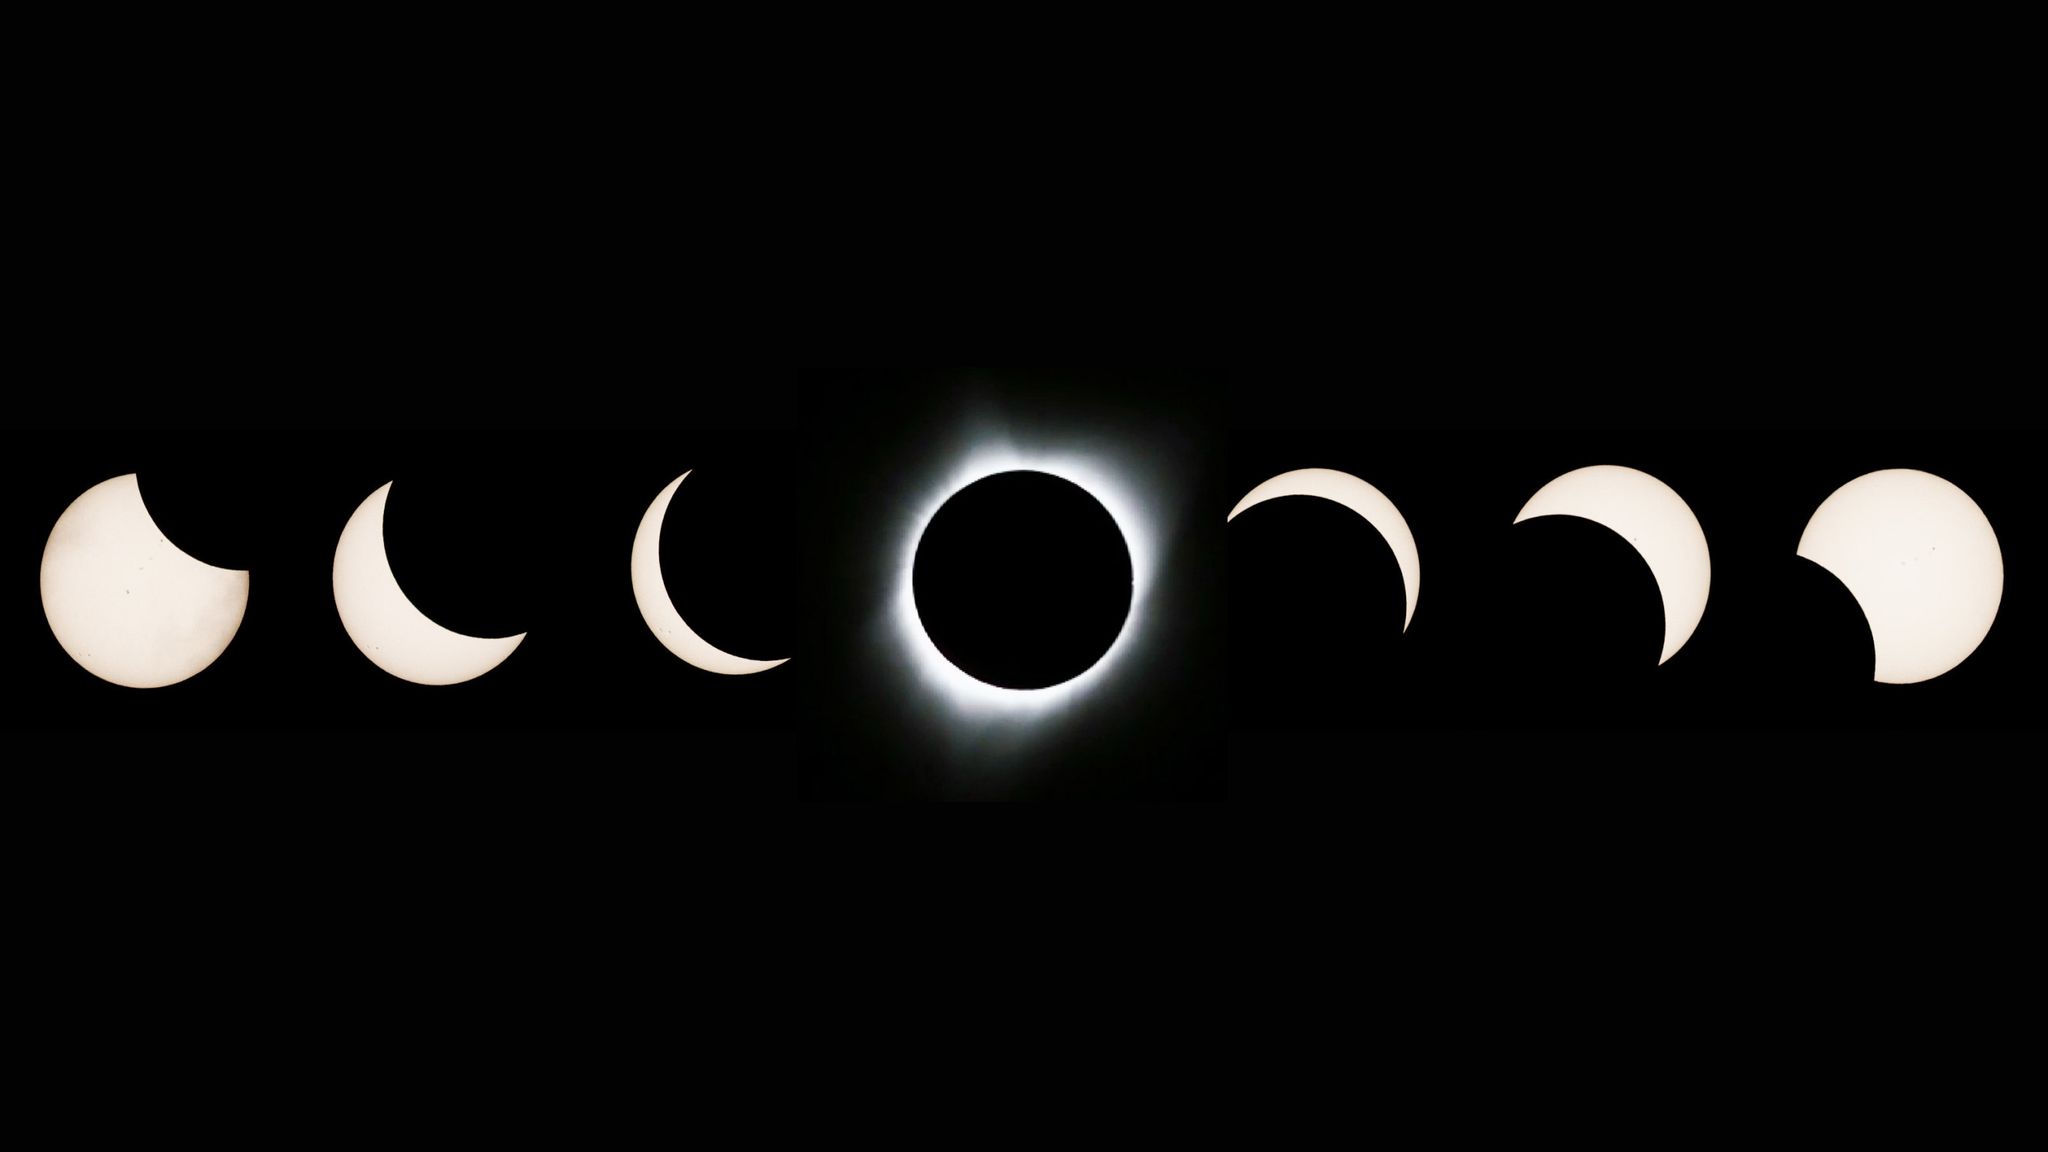 solar eclipse phases